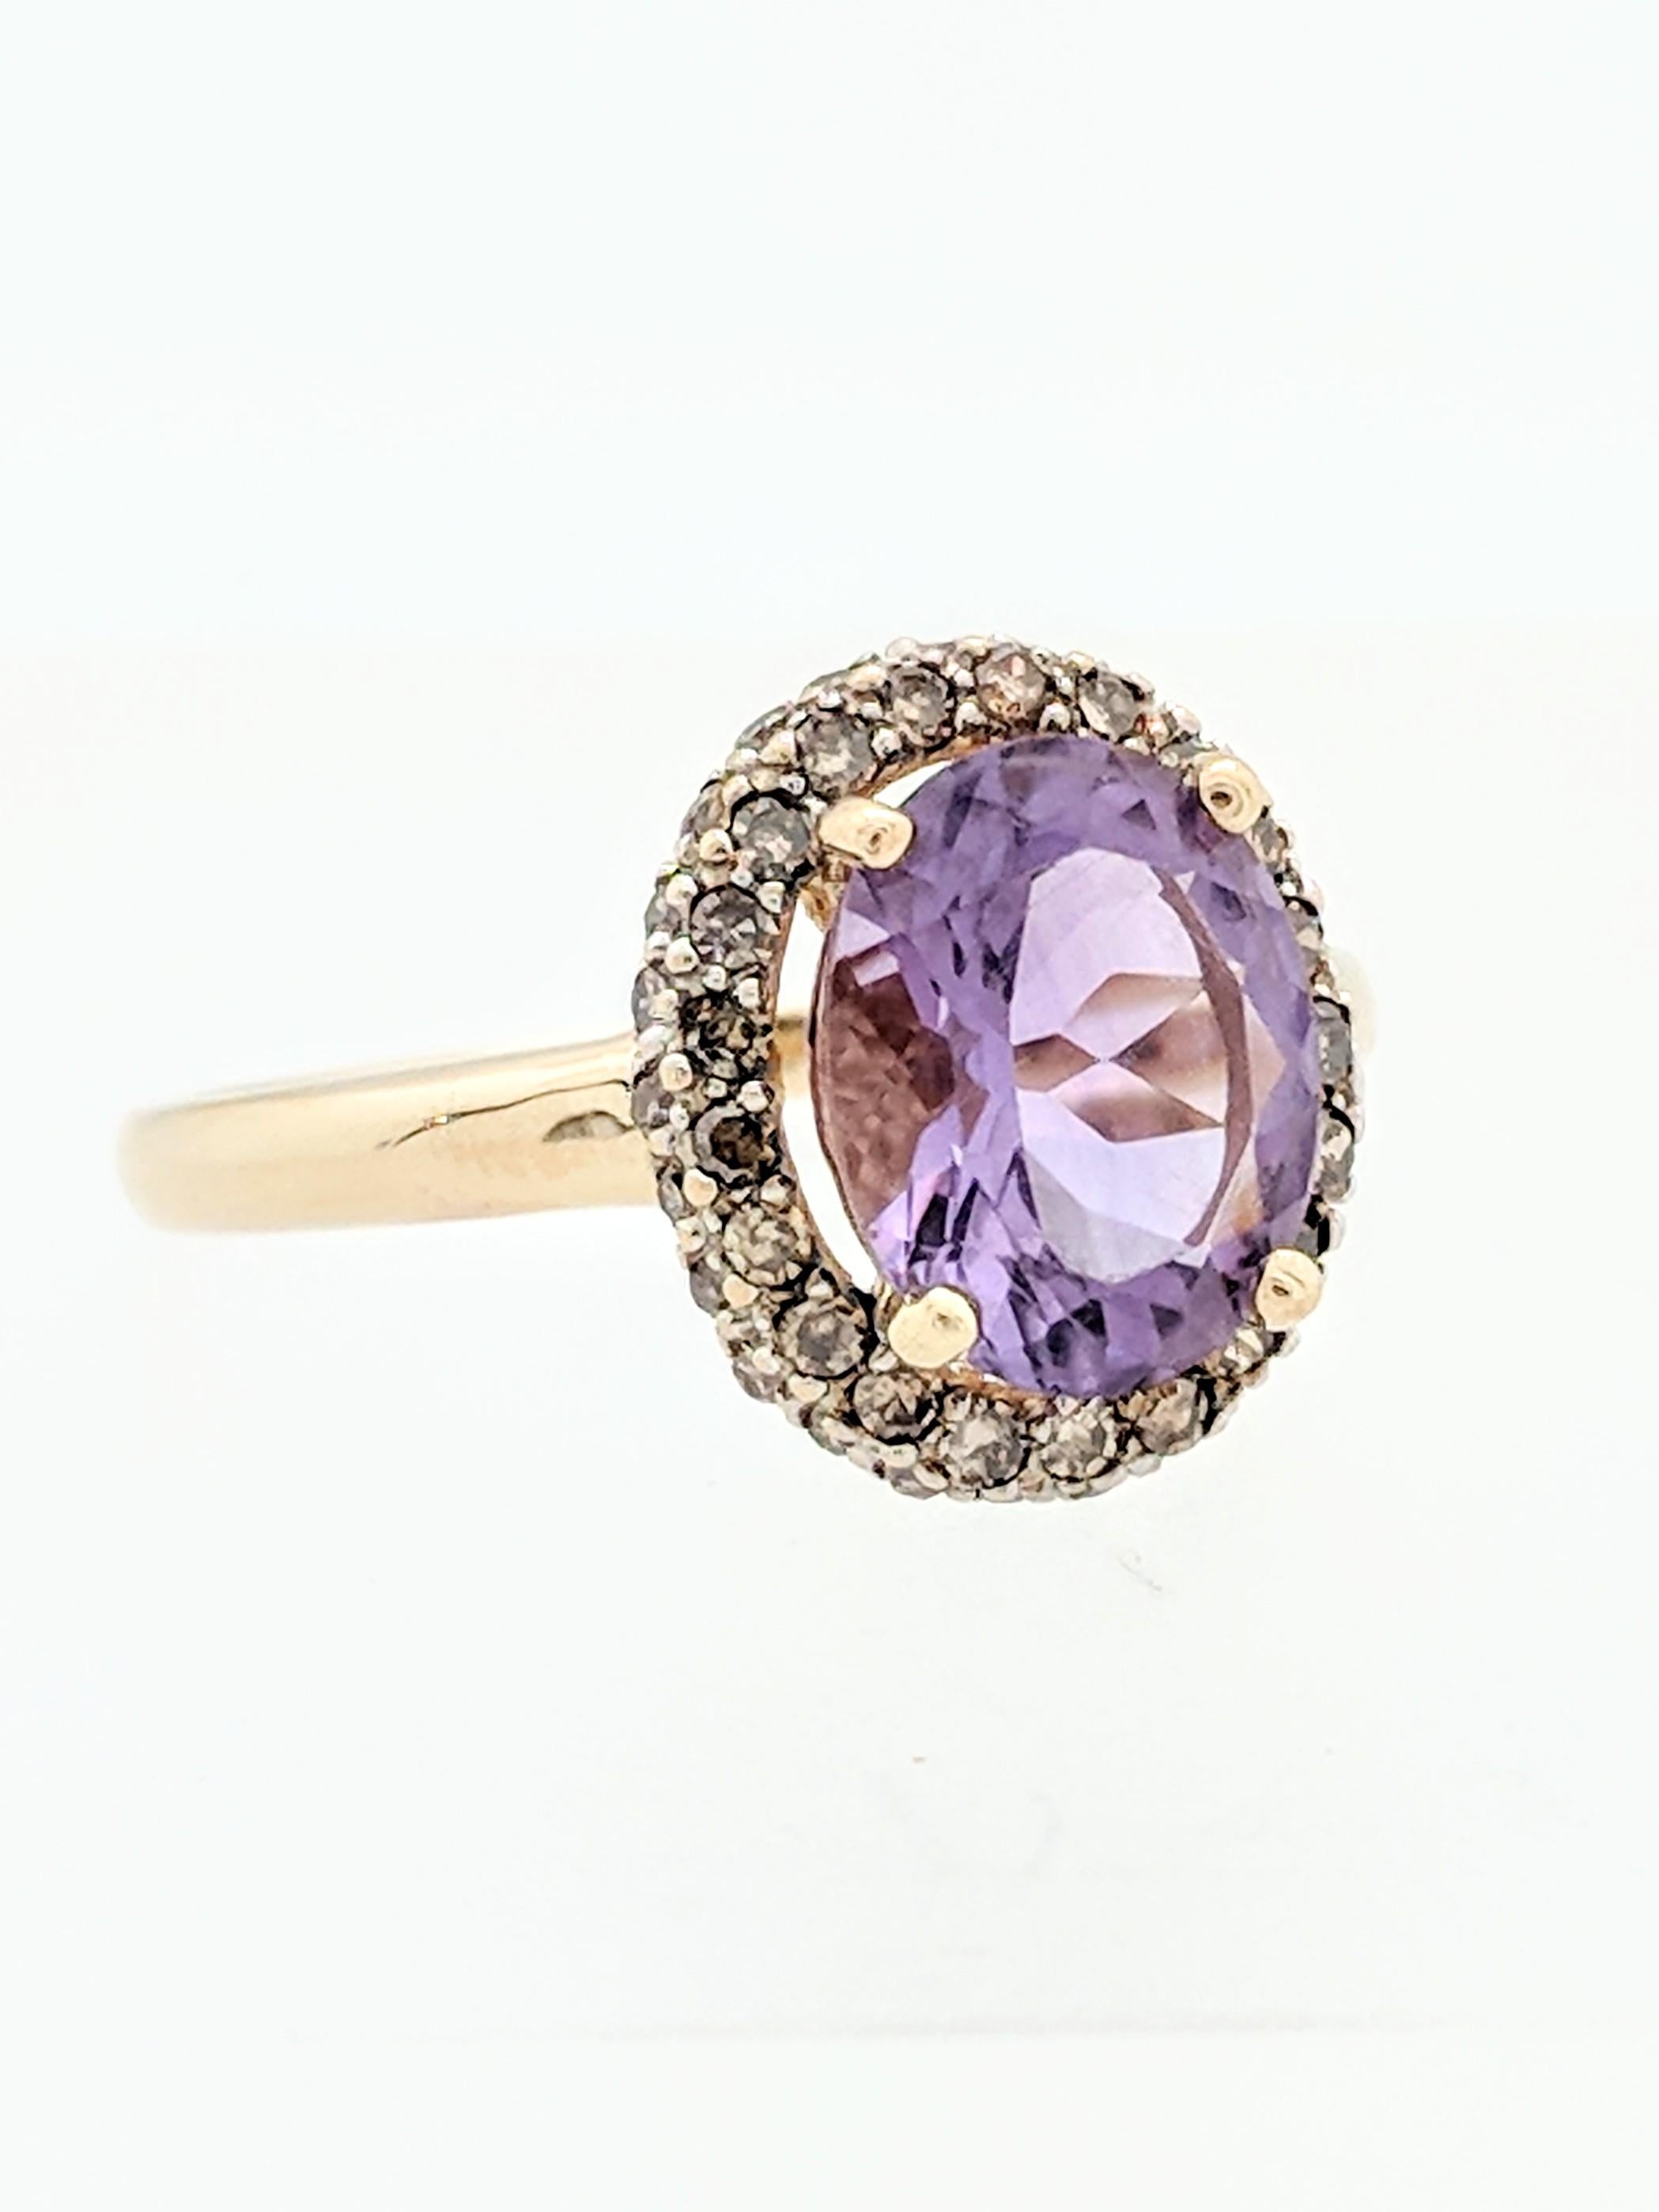 You are viewing a beautiful Amethyst and Champagne Diamond Halo Ring. Any woman would love to add this piece to their collection! This ring is crafted from 14k yellow gold and weighs 3.4 grams. It features one (1) 10x8mm (2.40ct) natural oval shaped